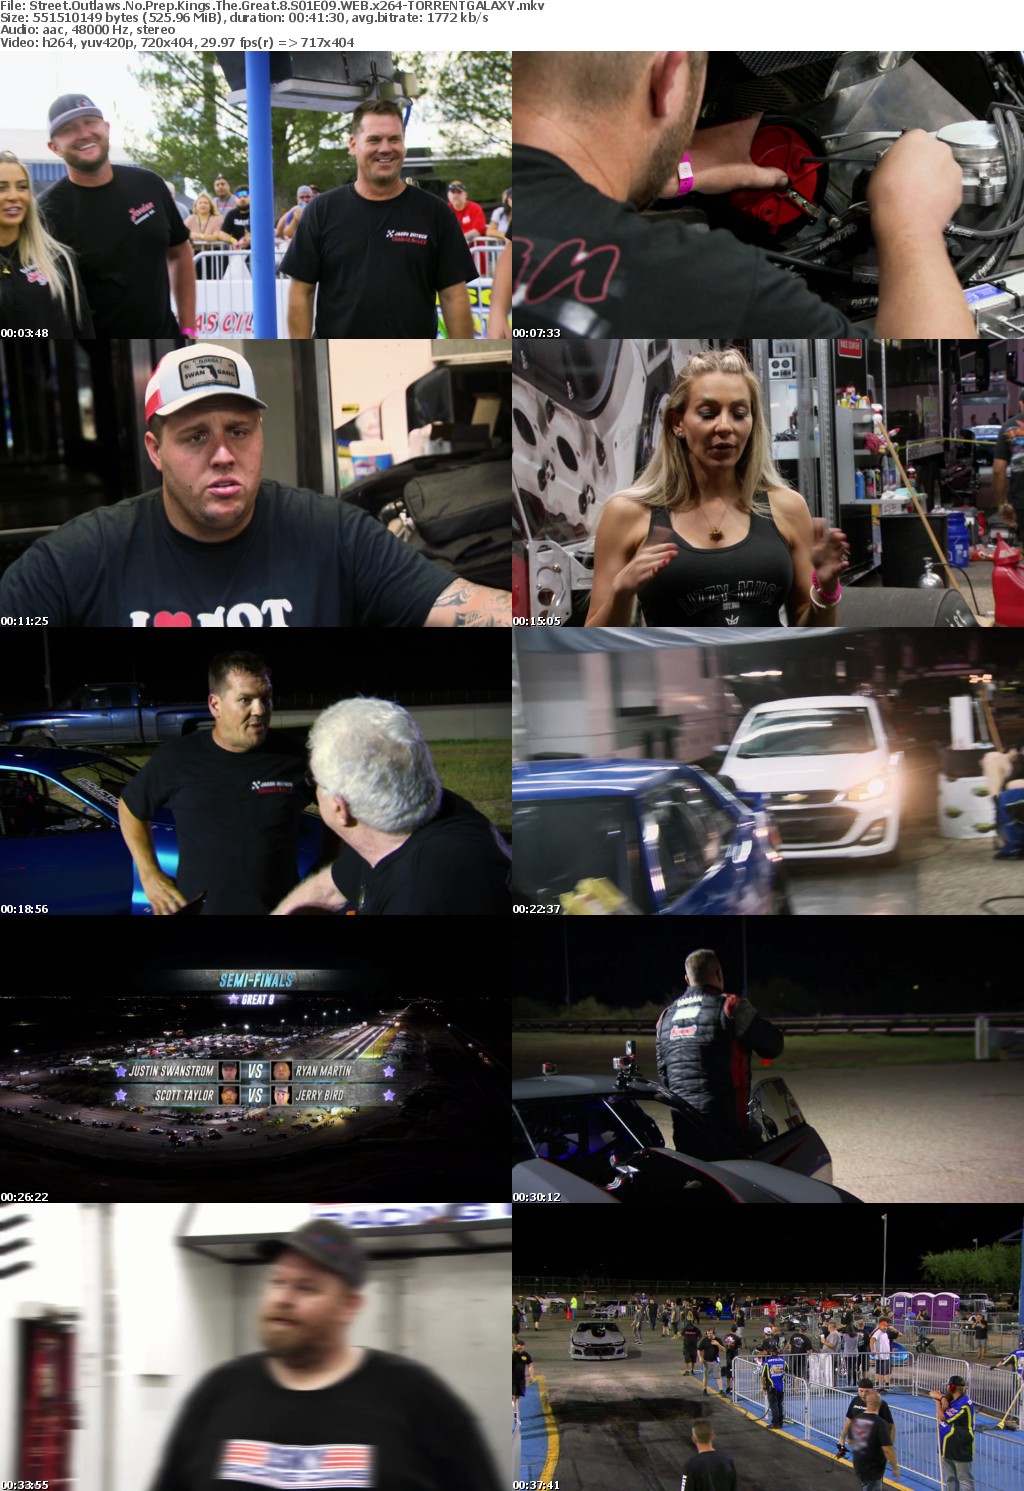 Street Outlaws No Prep Kings The Great 8 S01E09 WEB x264-GALAXY